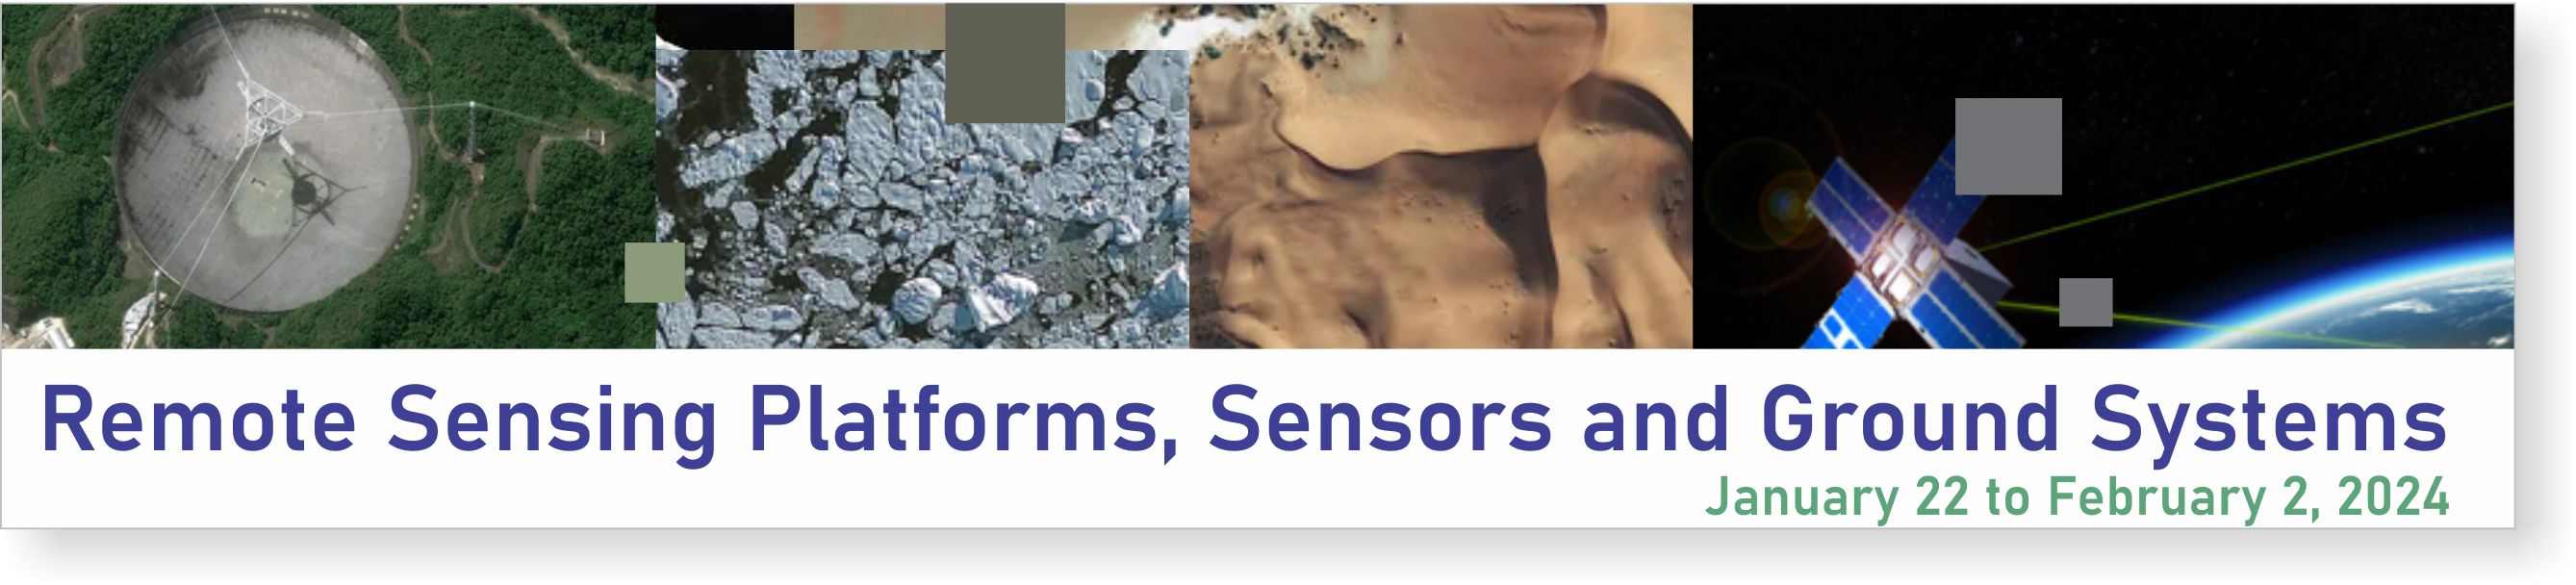 Remote Sensing Platforms, Sensors and Ground Systems